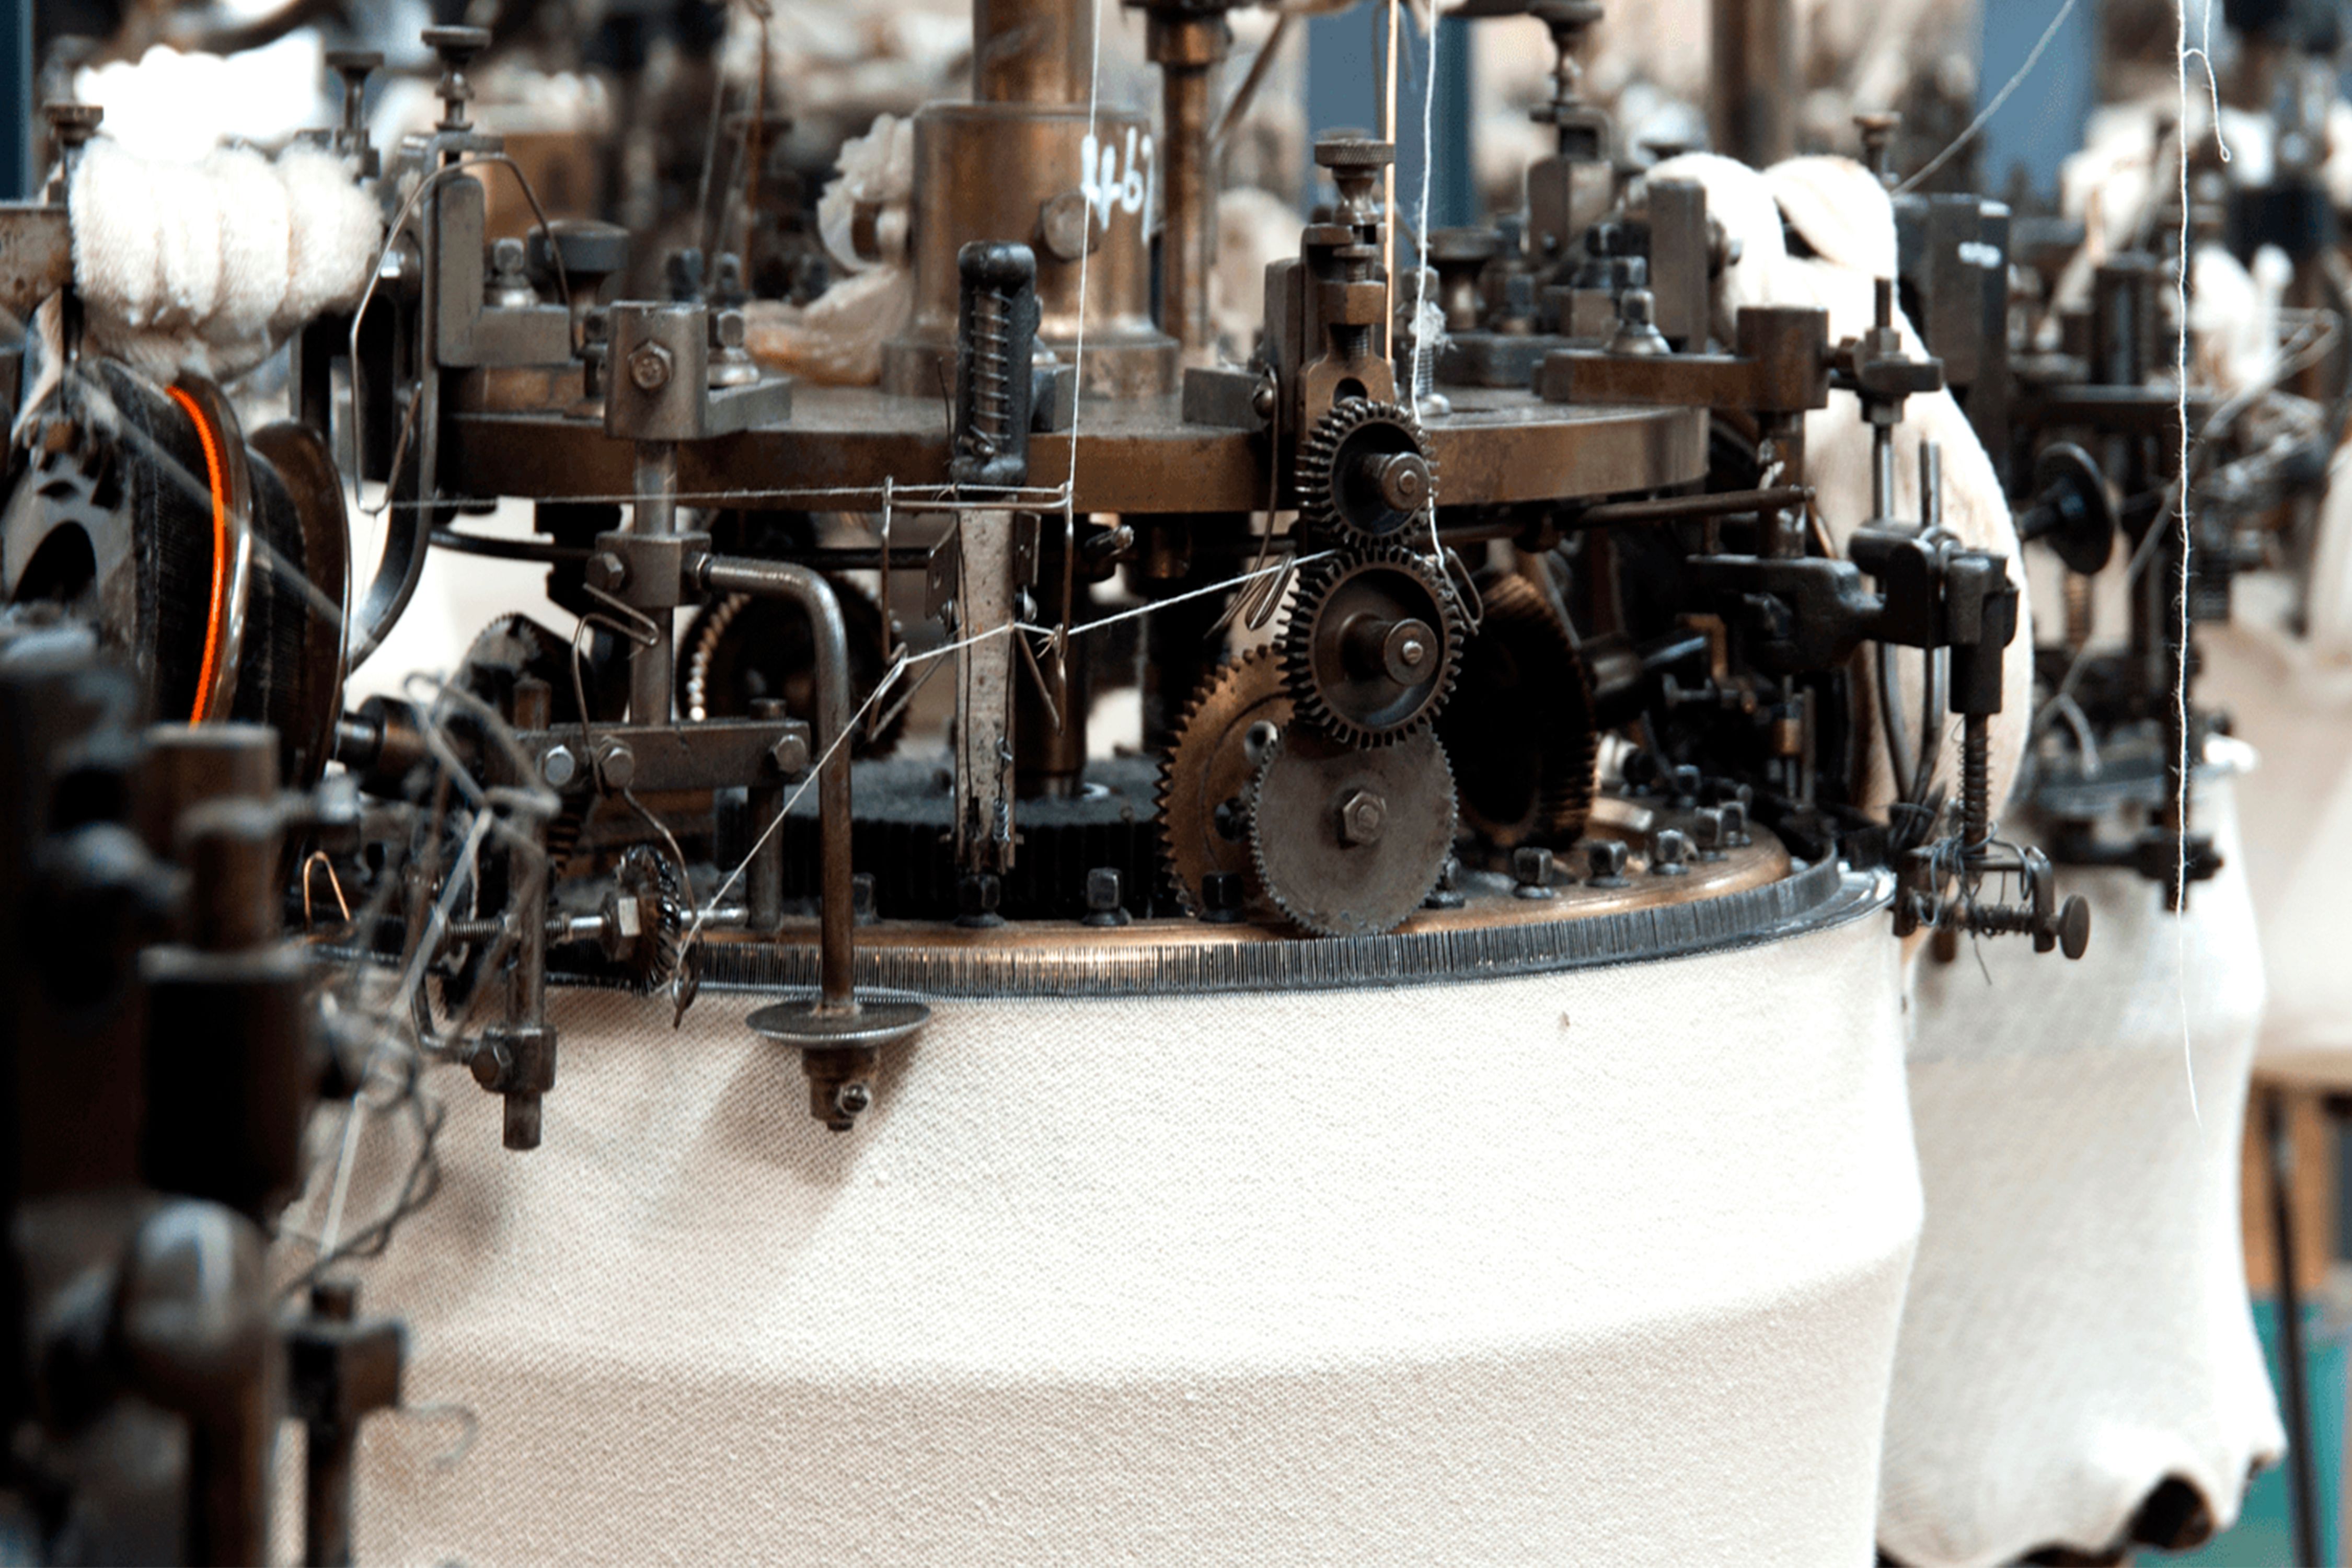 Making Garments the 1940s Way